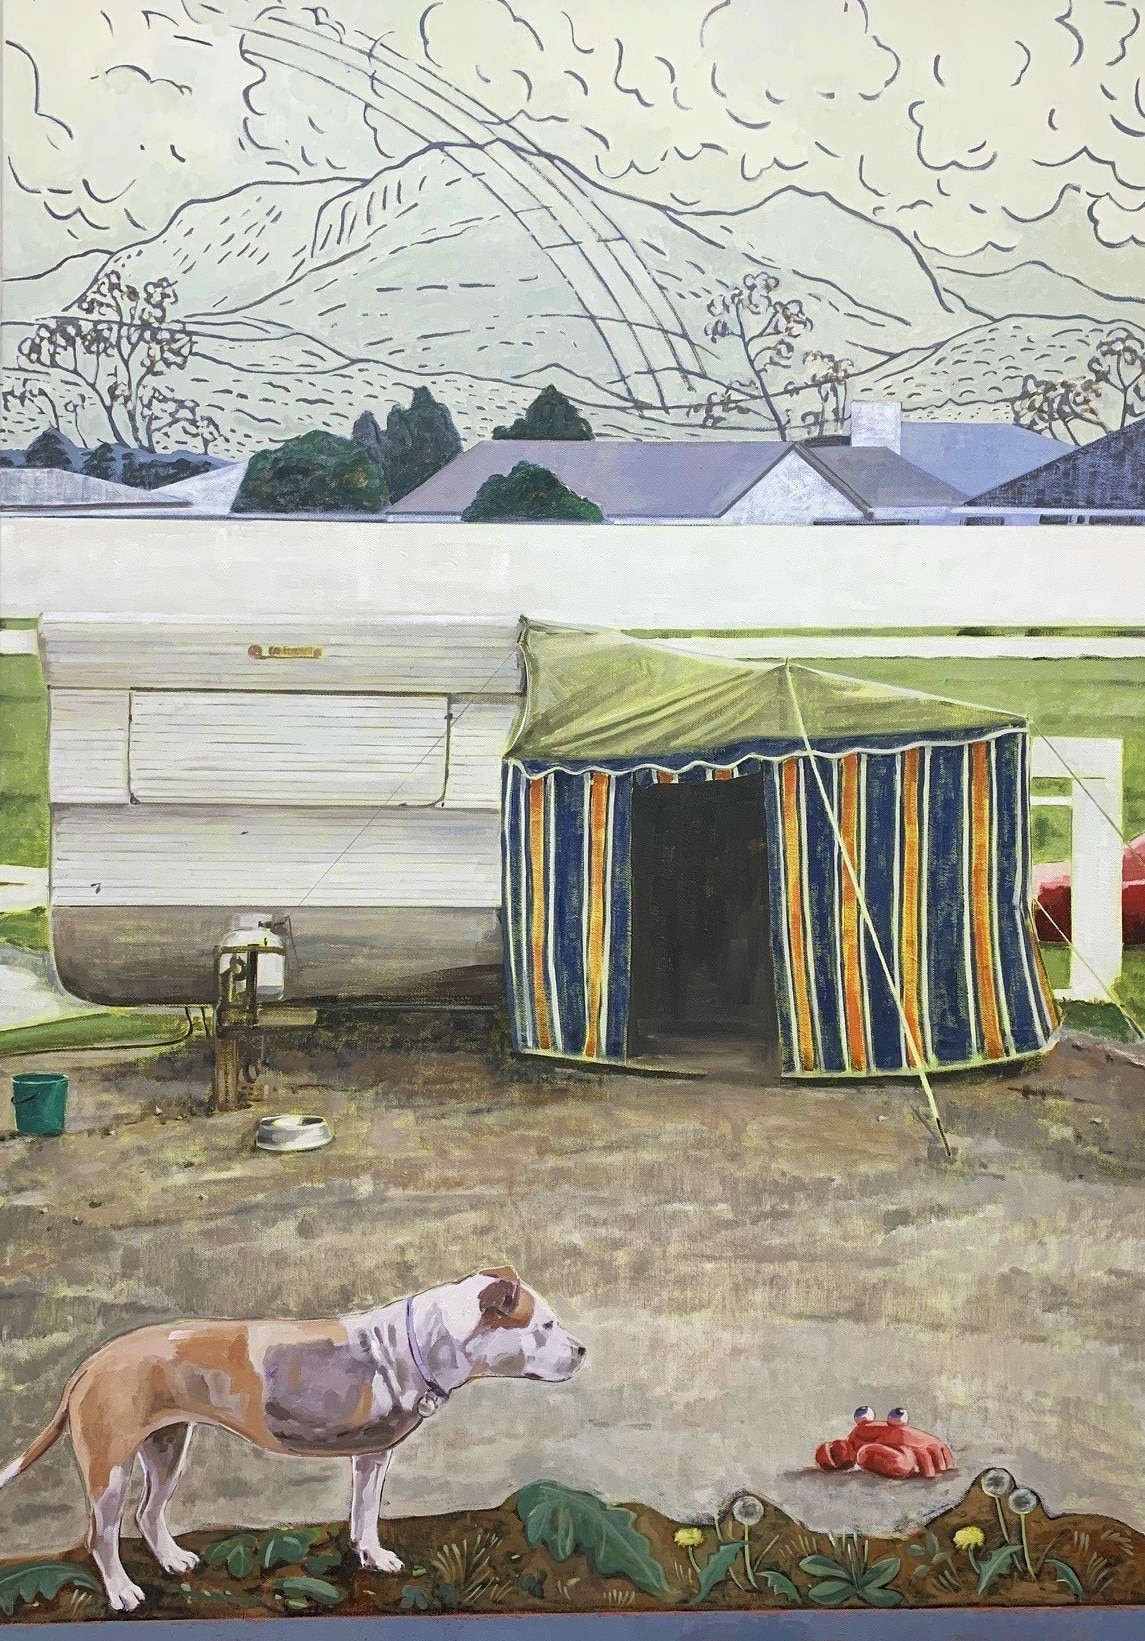 Glover Artwork Prize for greatest panorama goes to portray of homelessness by artist Jo Chew